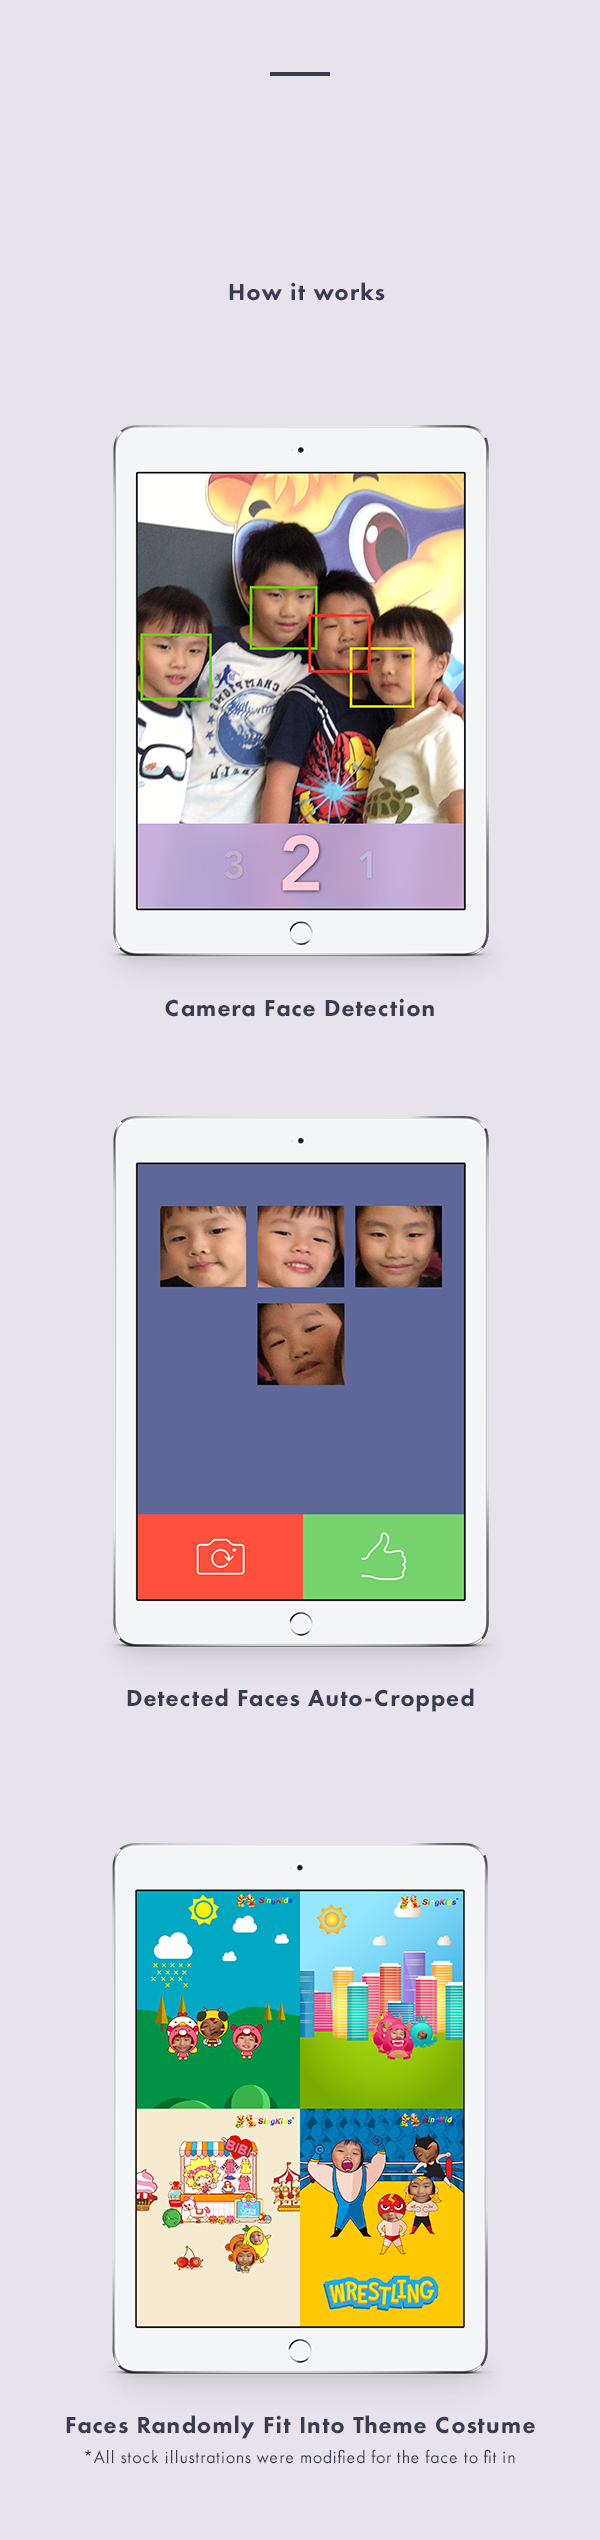 photo face detection booth iPad children app camera